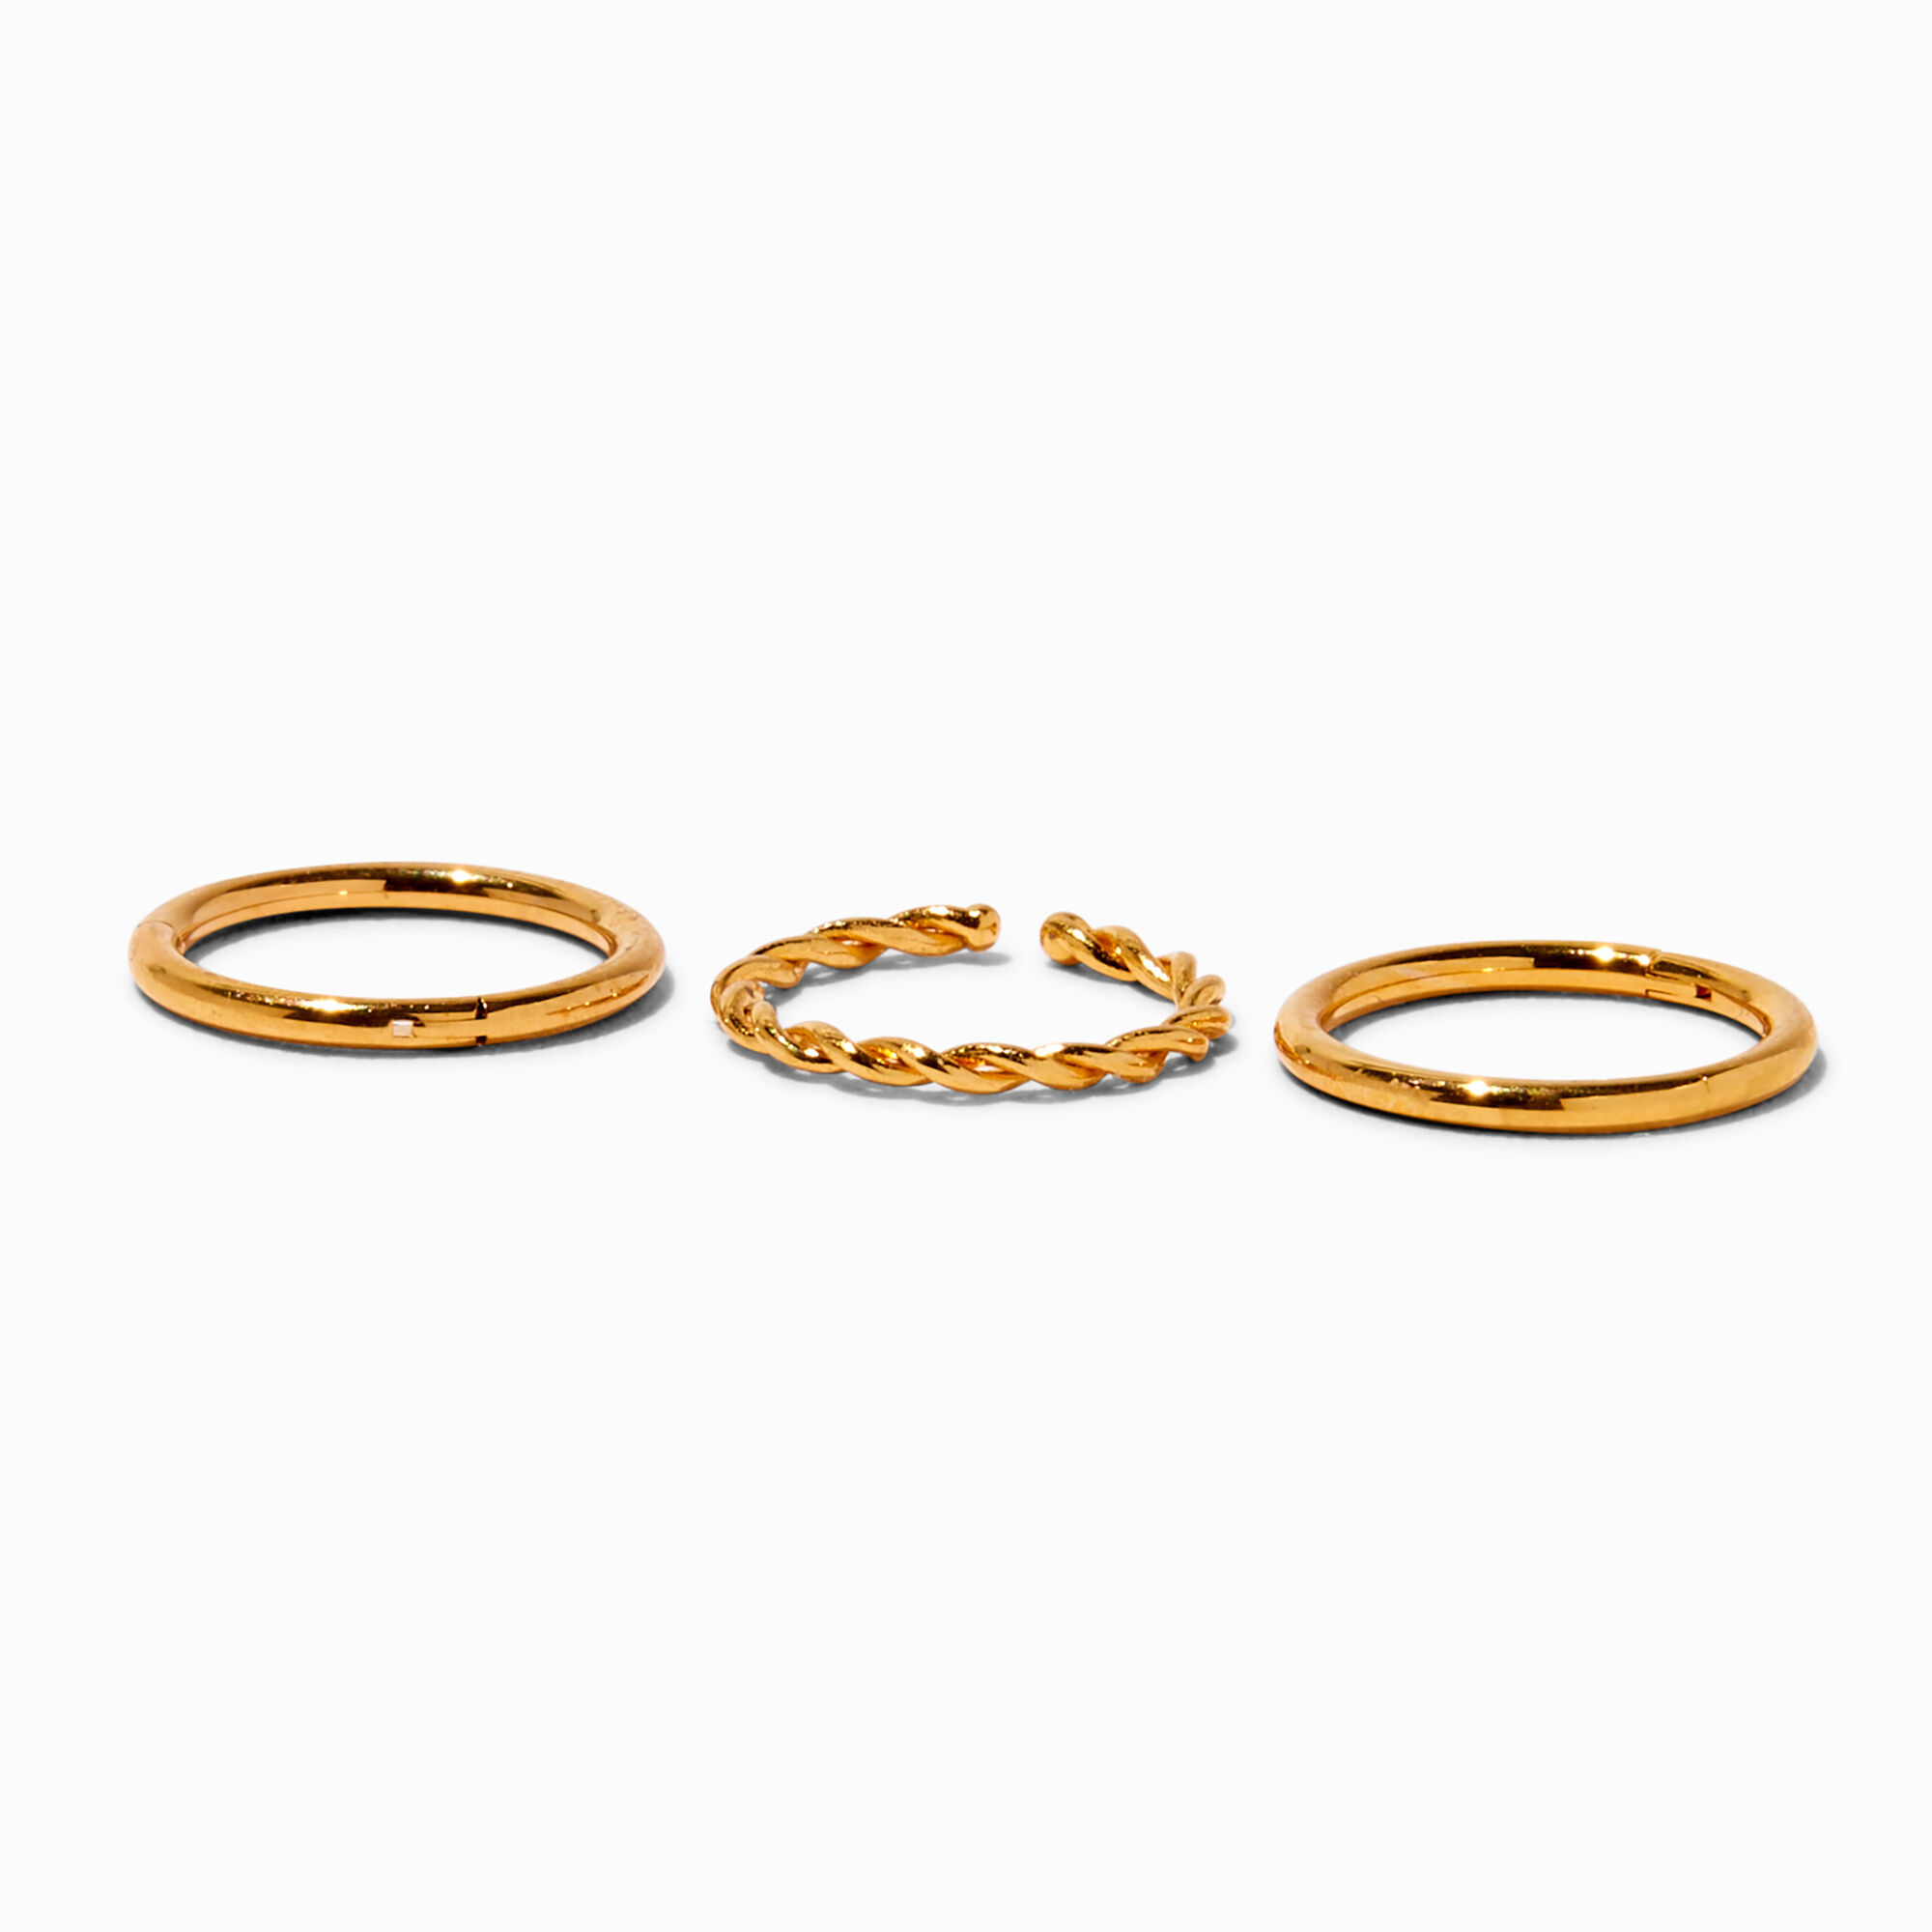 View Claires 18K Plated Titanium Braided Smooth 18G Nose Hoop Rings 3 Pack Gold information